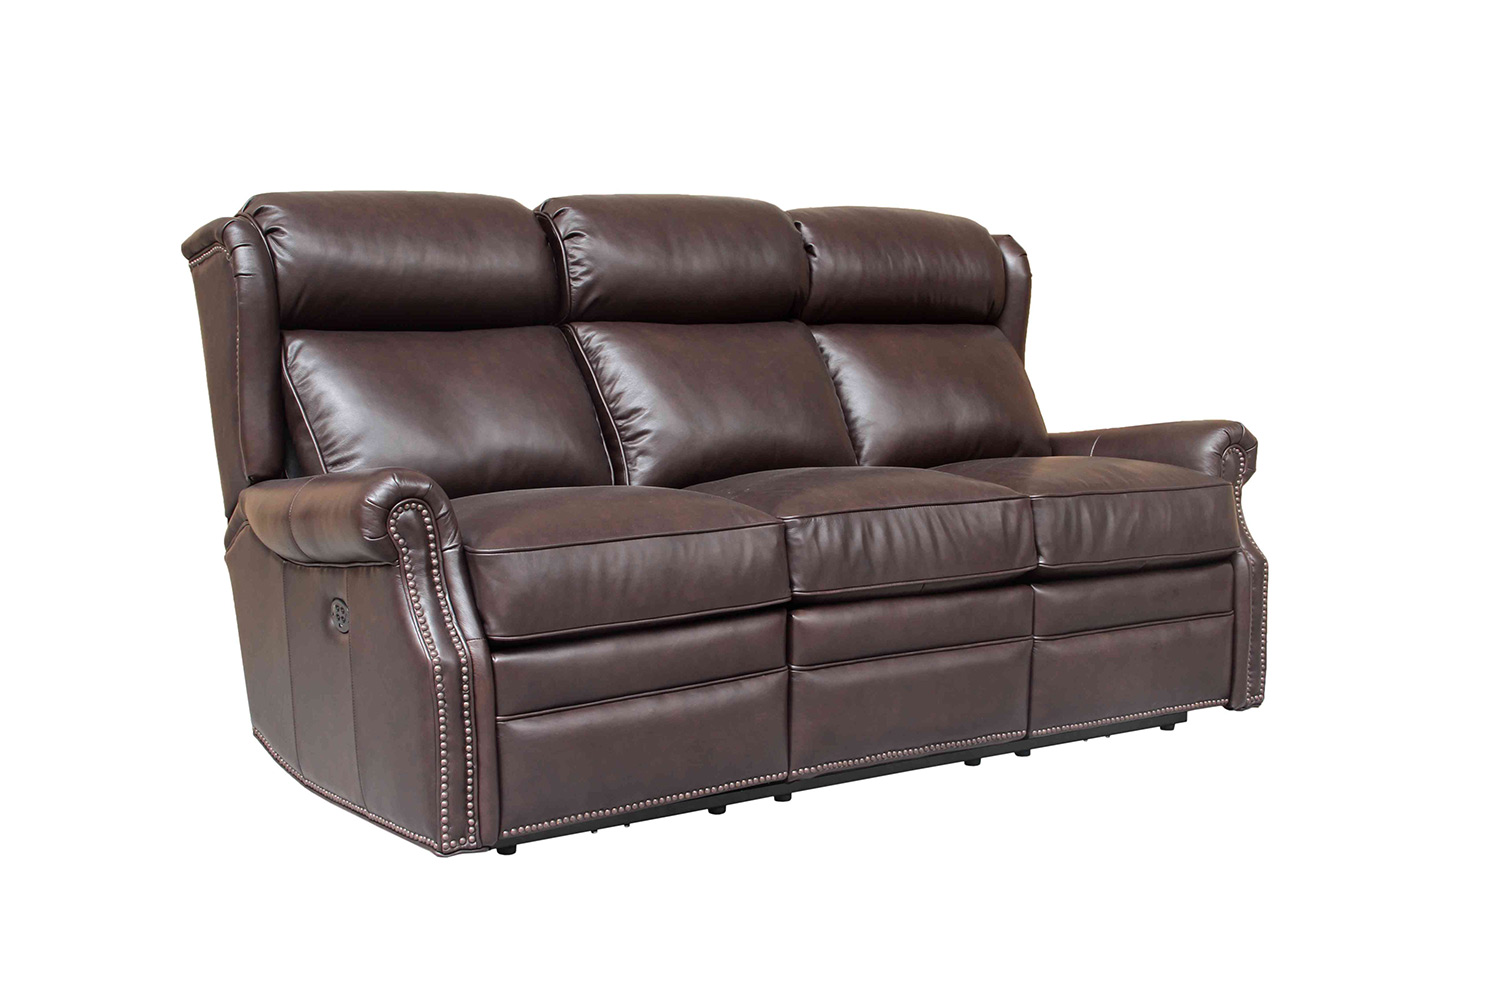 Barcalounger Southington Power Reclining Sofa with Power Head Rests - Shoreham Dark Umber/All Leather